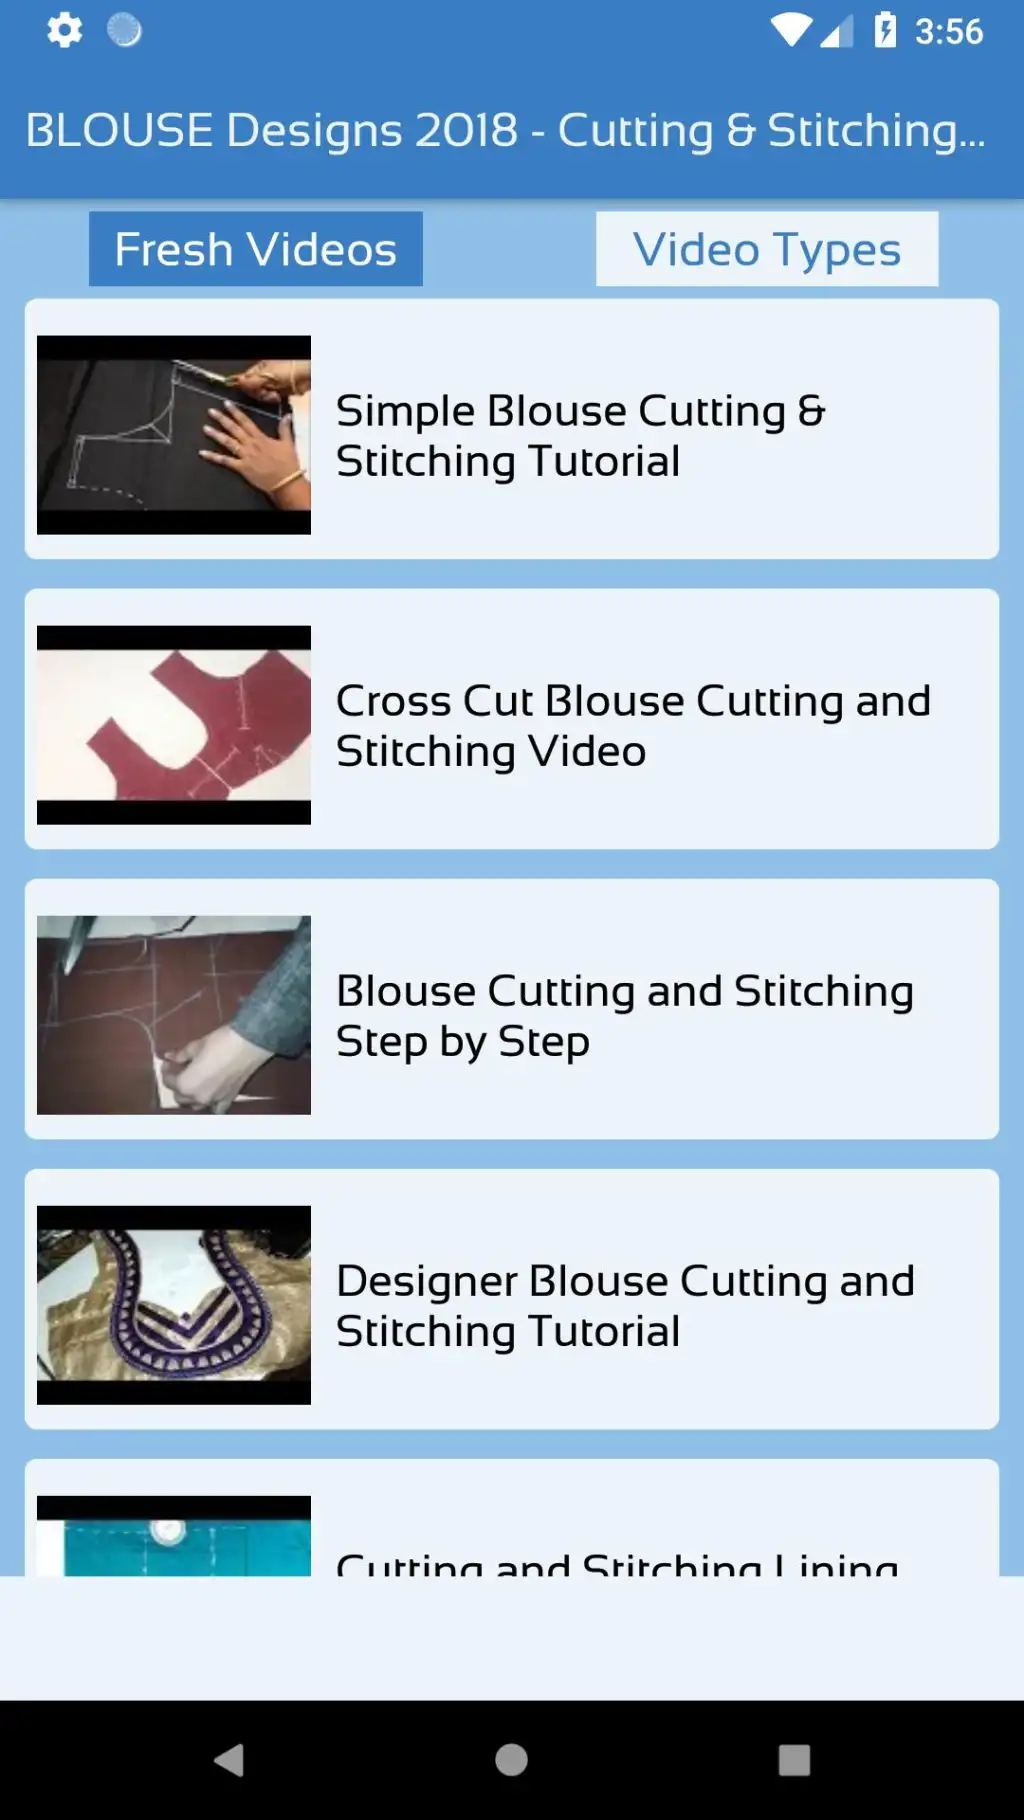 Simple Blouse Cutting and Stitching, Step by Step